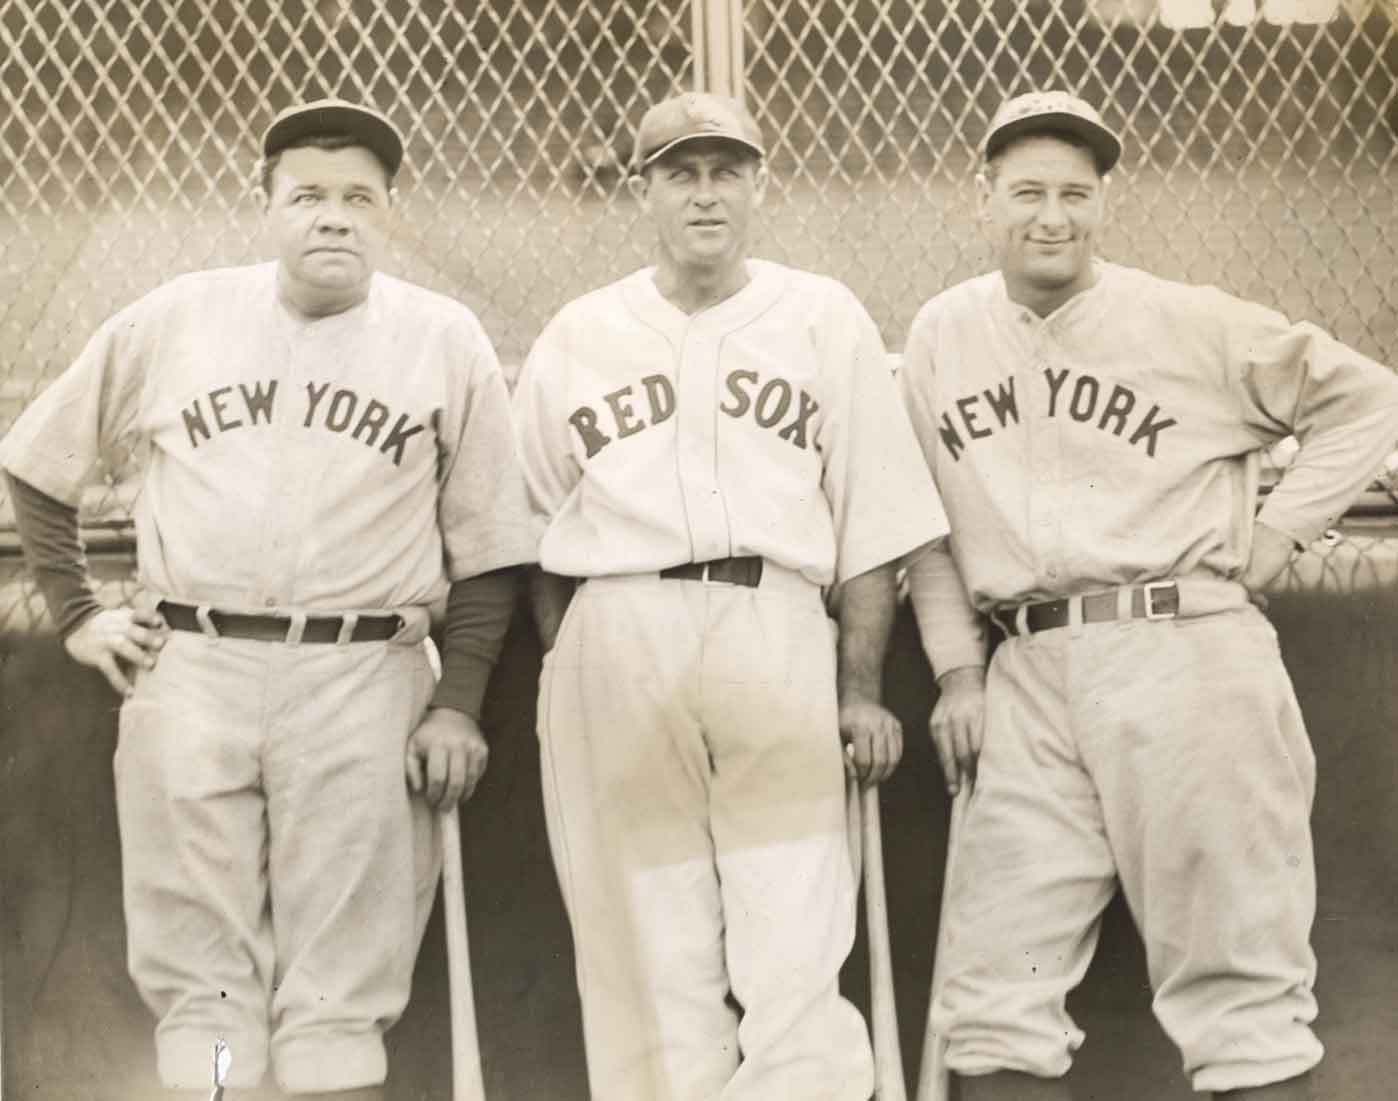 BABE RUTH 8x10 CELEBRITY PHOTO PICTURE THE SHOT 